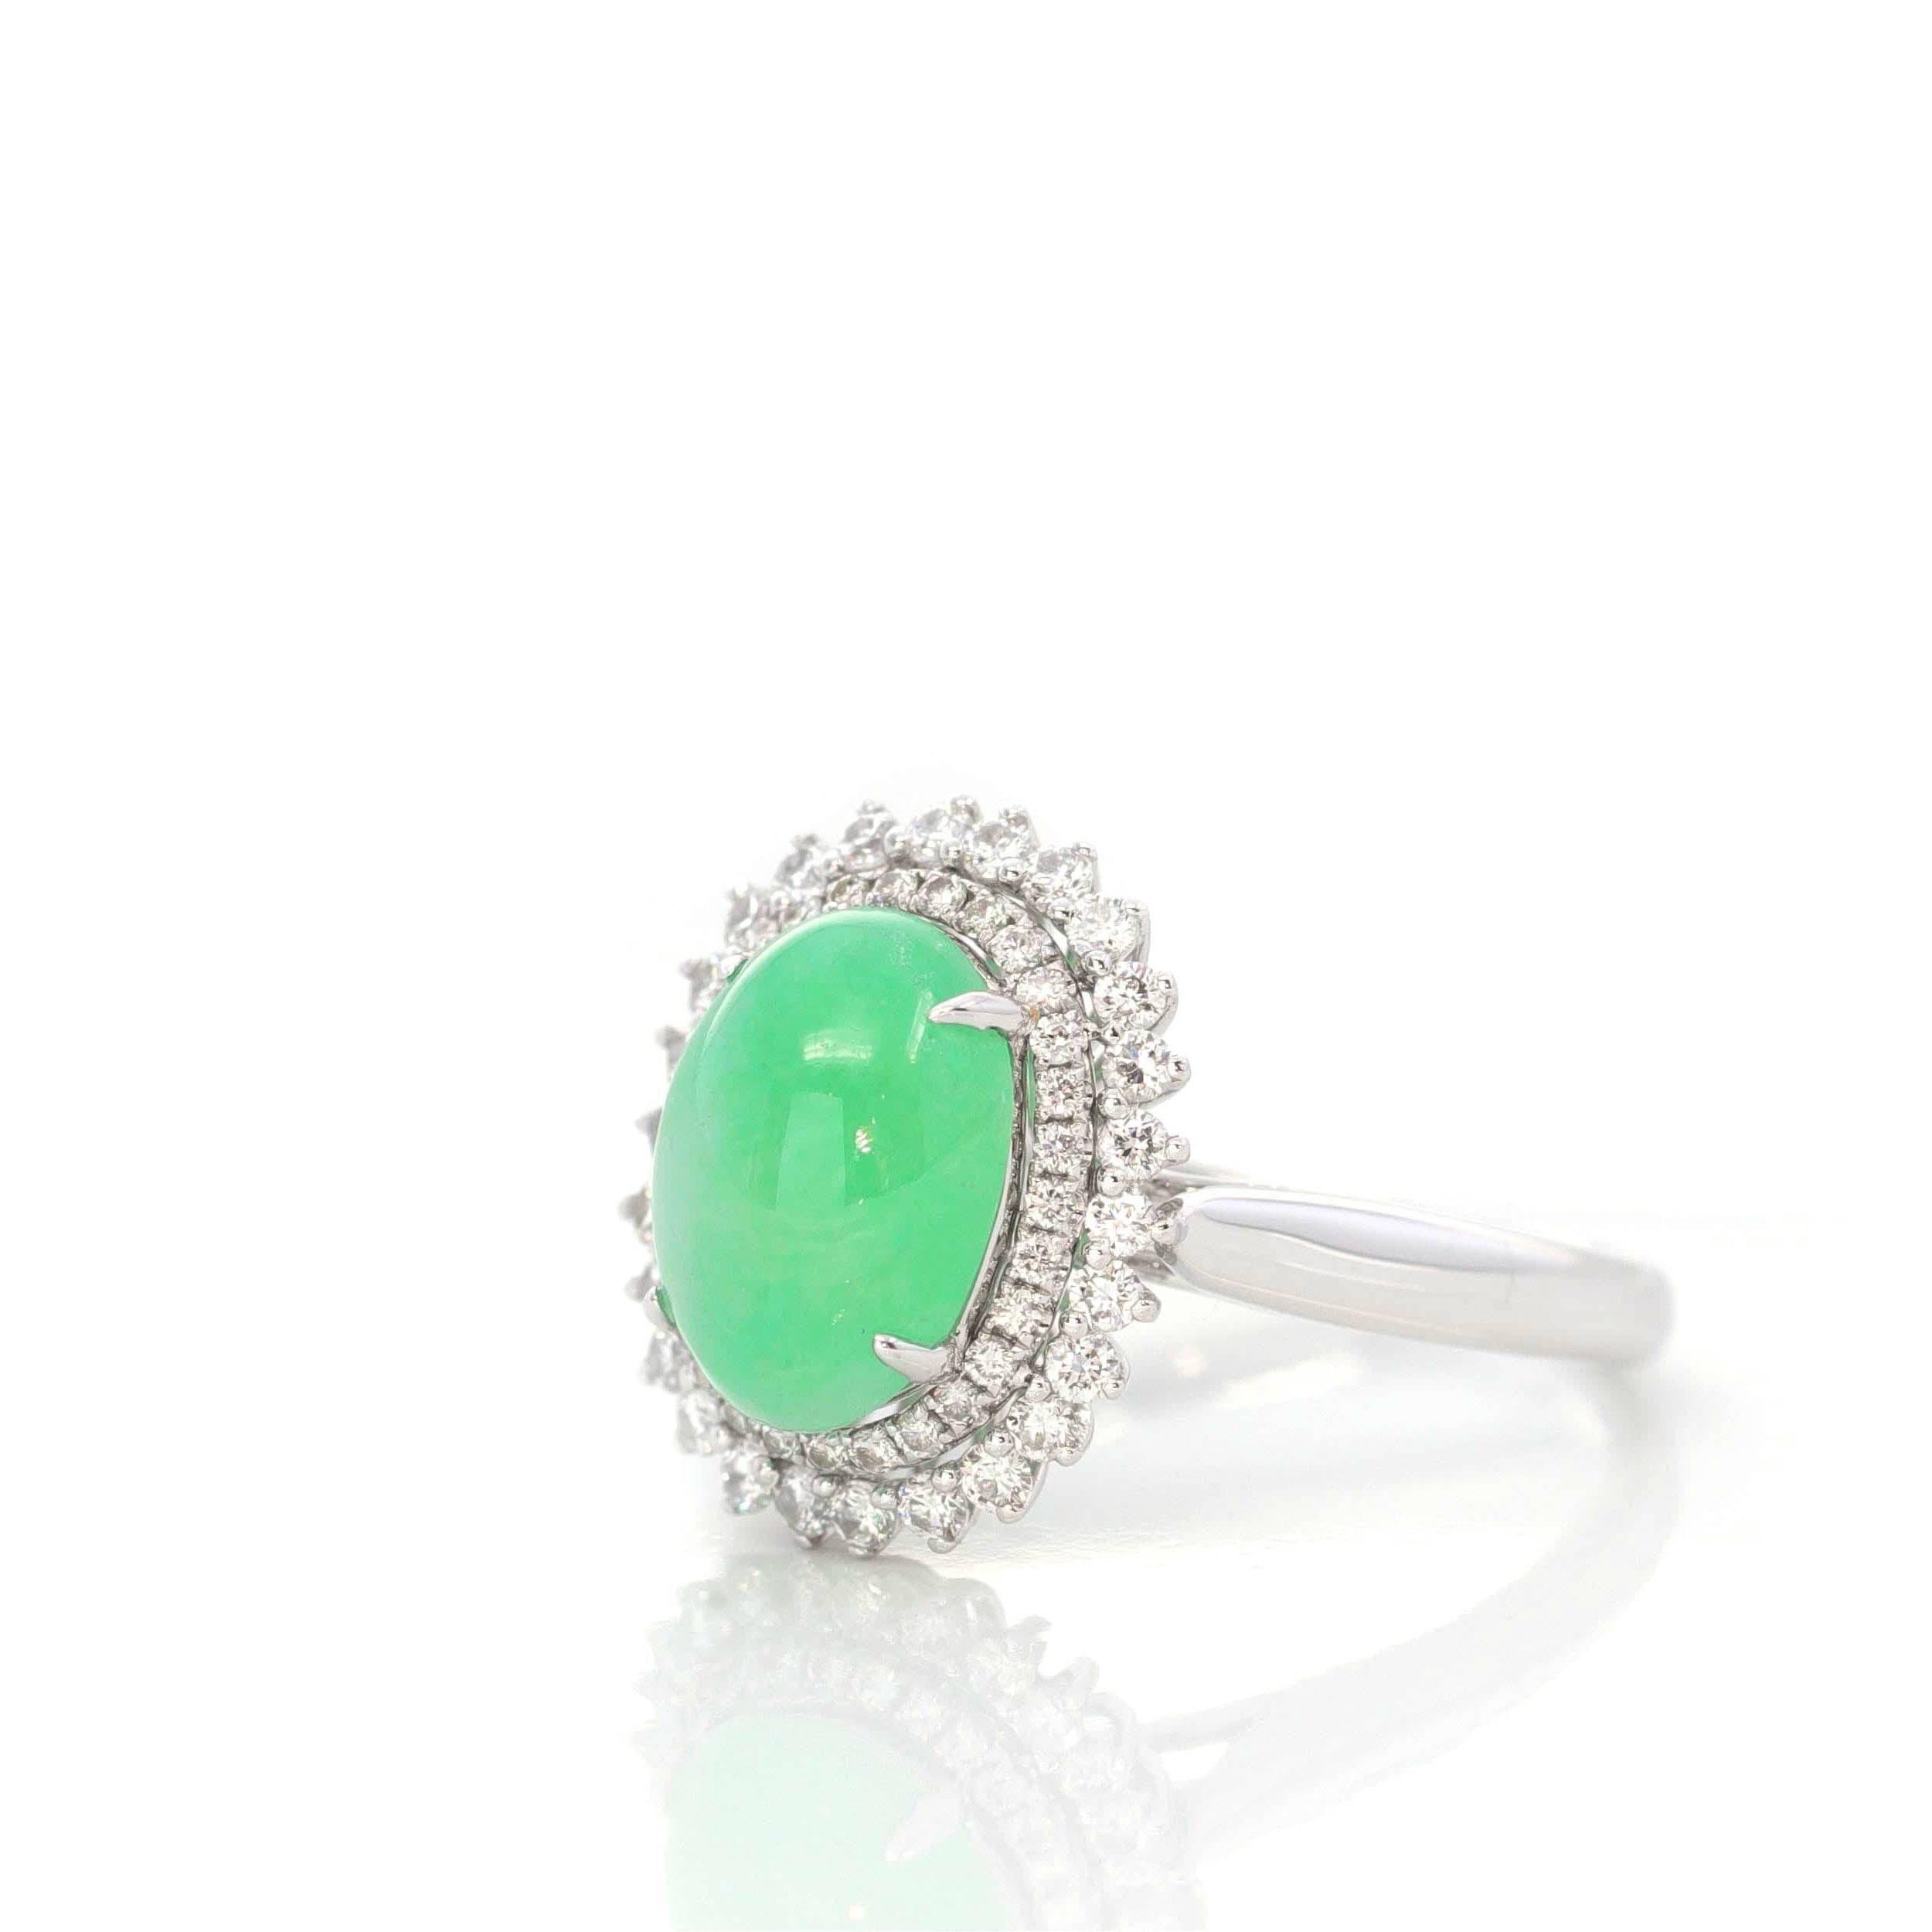 * ORIGINAL DESIGN --- Inspired by the natural beauty of Genuine Burmese Imperial Green Jadeite, the rich beautiful apple green color is found on no other stone. This one of a kind engagement ring combines the natural beauty of the extremely rare gem